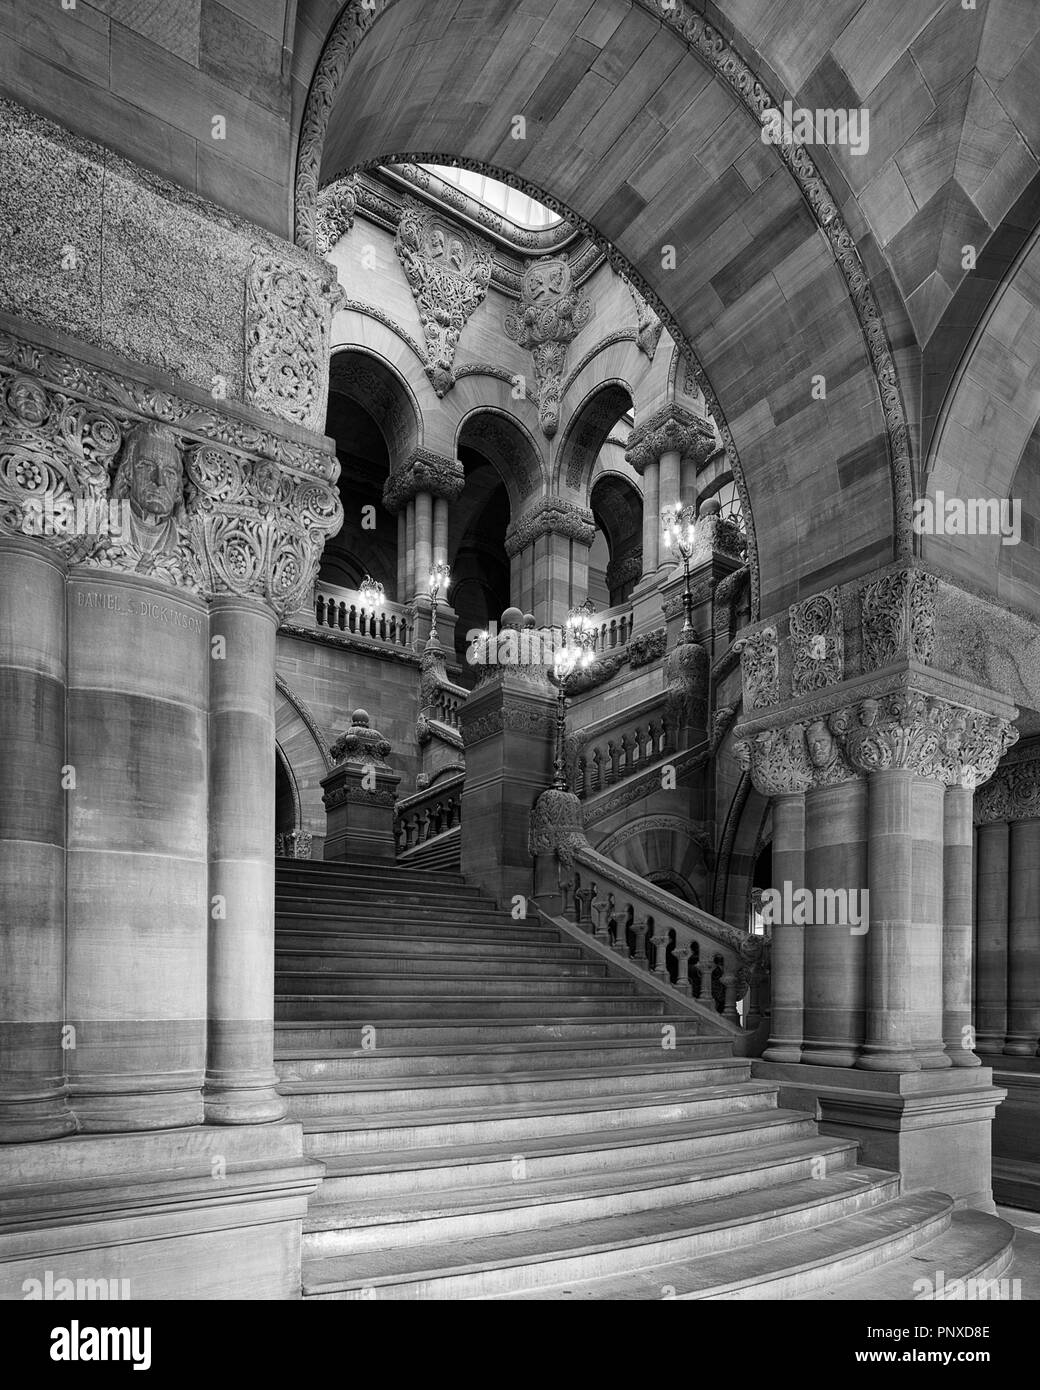 The Great Western Staircase (or 'Million Dollar Staircase') inside the New York State Capitol building in Albany, New York Stock Photo